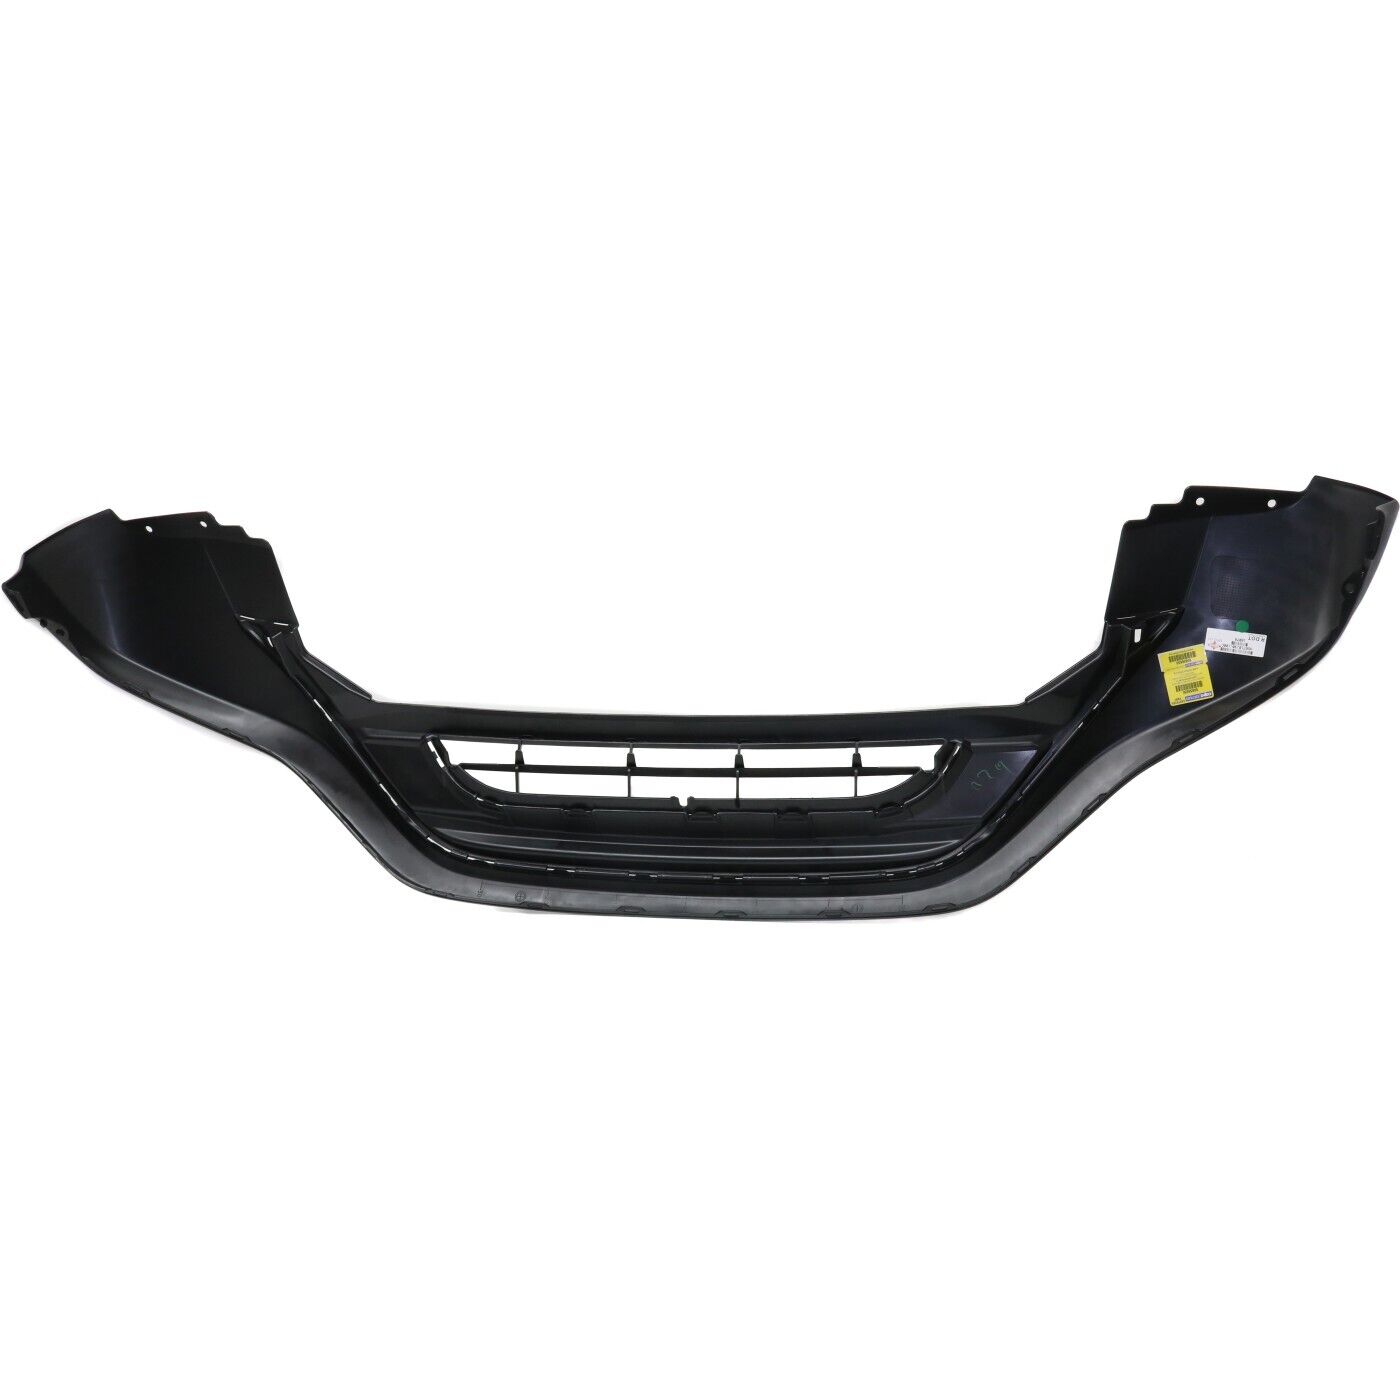 2015-2016 HONDA CR-V; Front Bumper Cover lower; Painted to Match